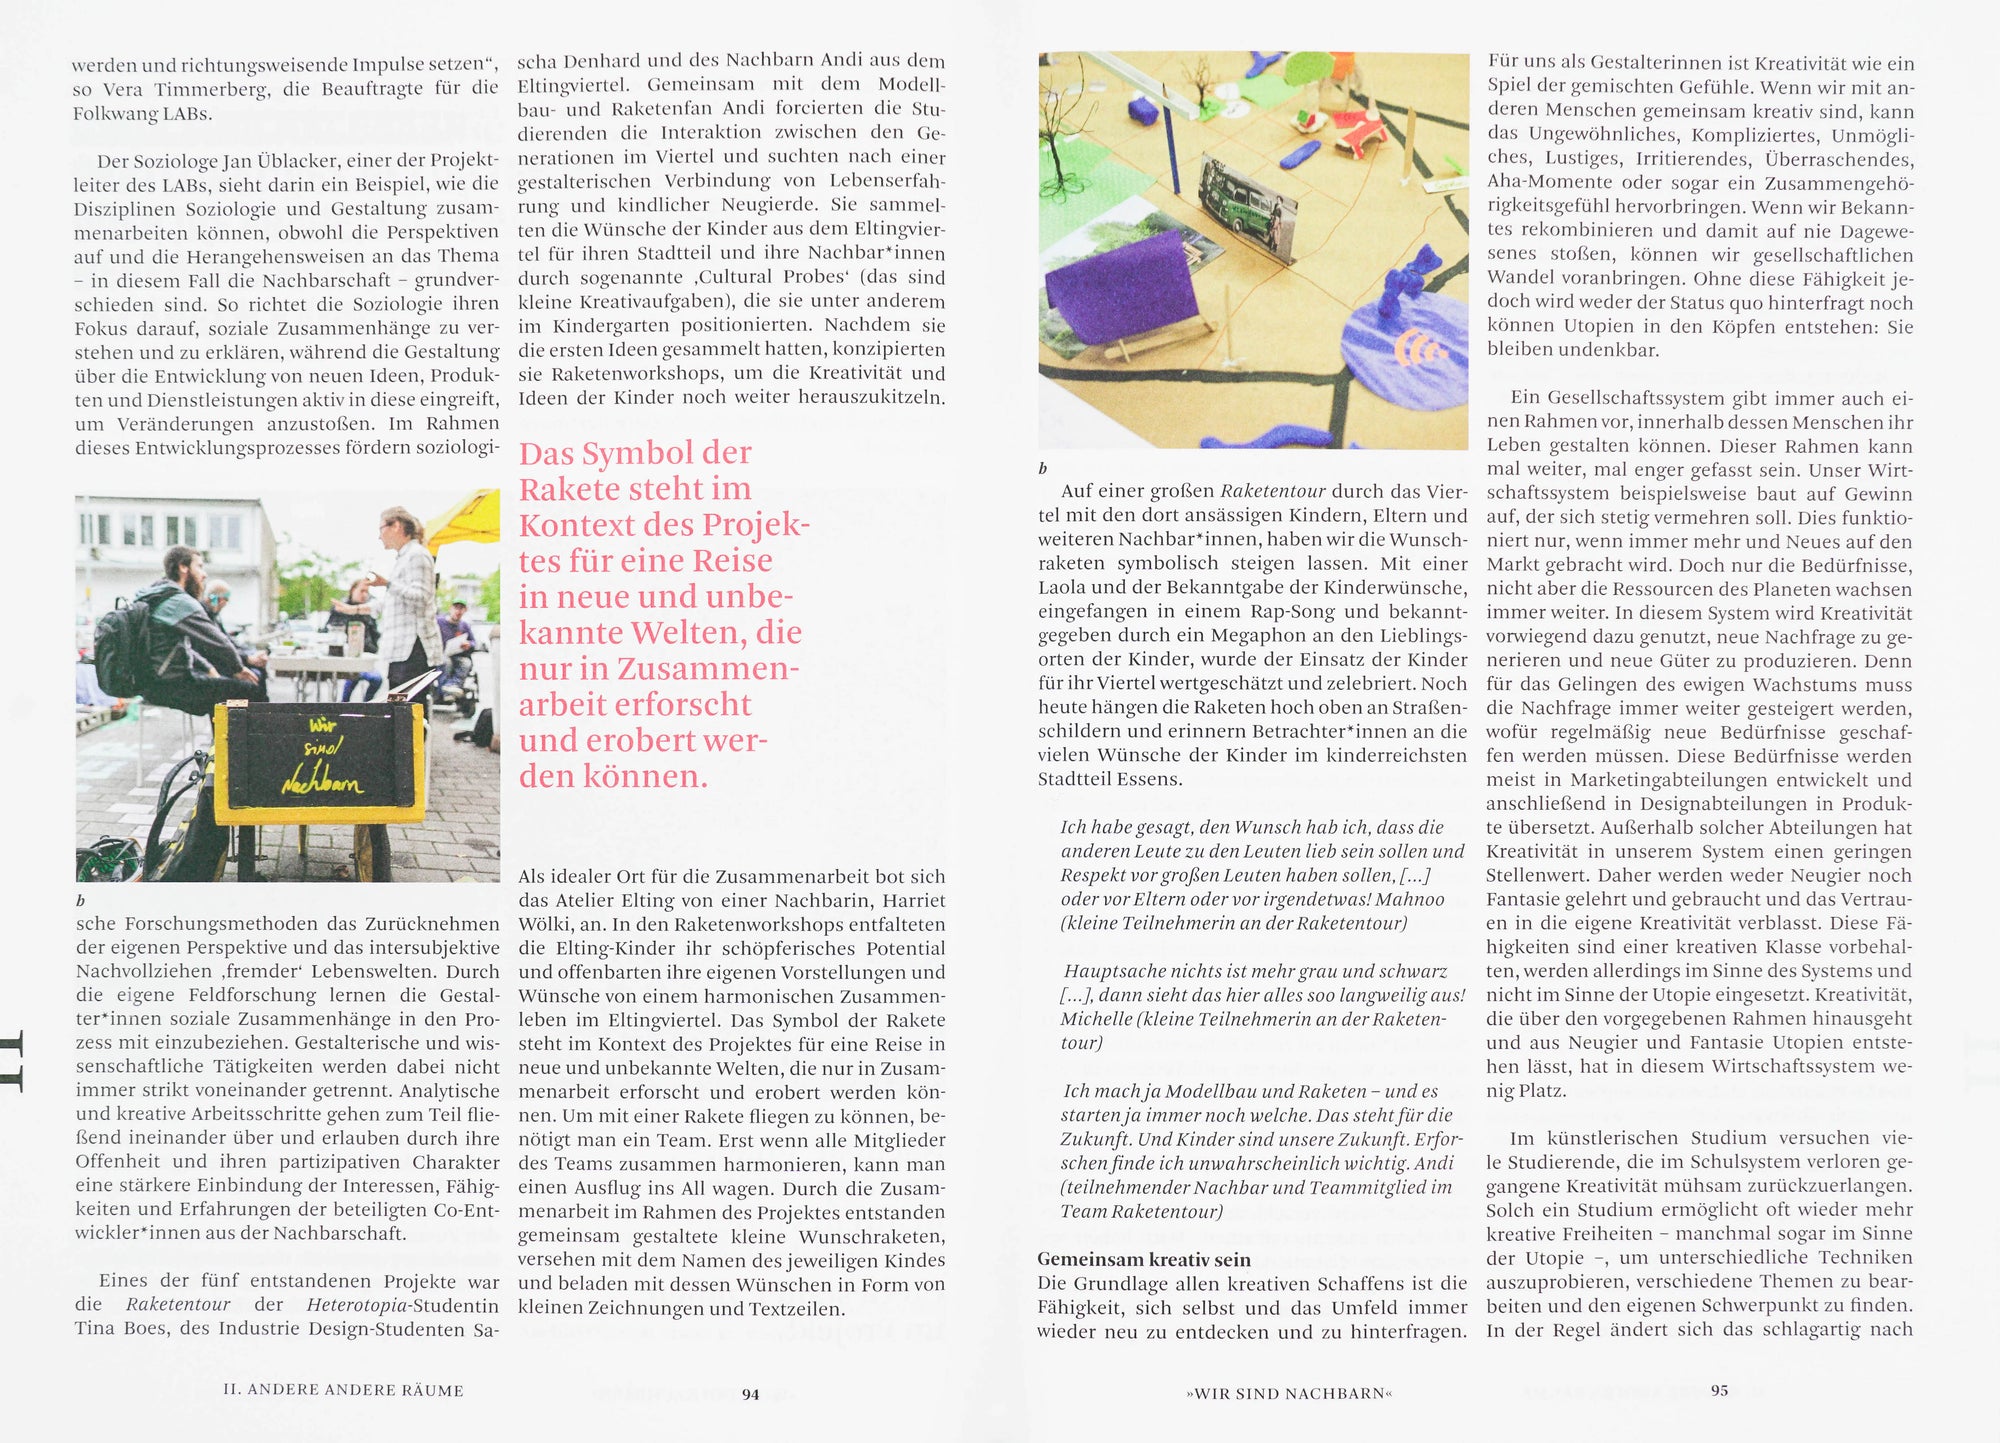 Book spread with white background and two serif black text columns on each page. On each side the columns are interrupted by two small colour images depicting two people sitting on the street on the left as well as materials on the right page.